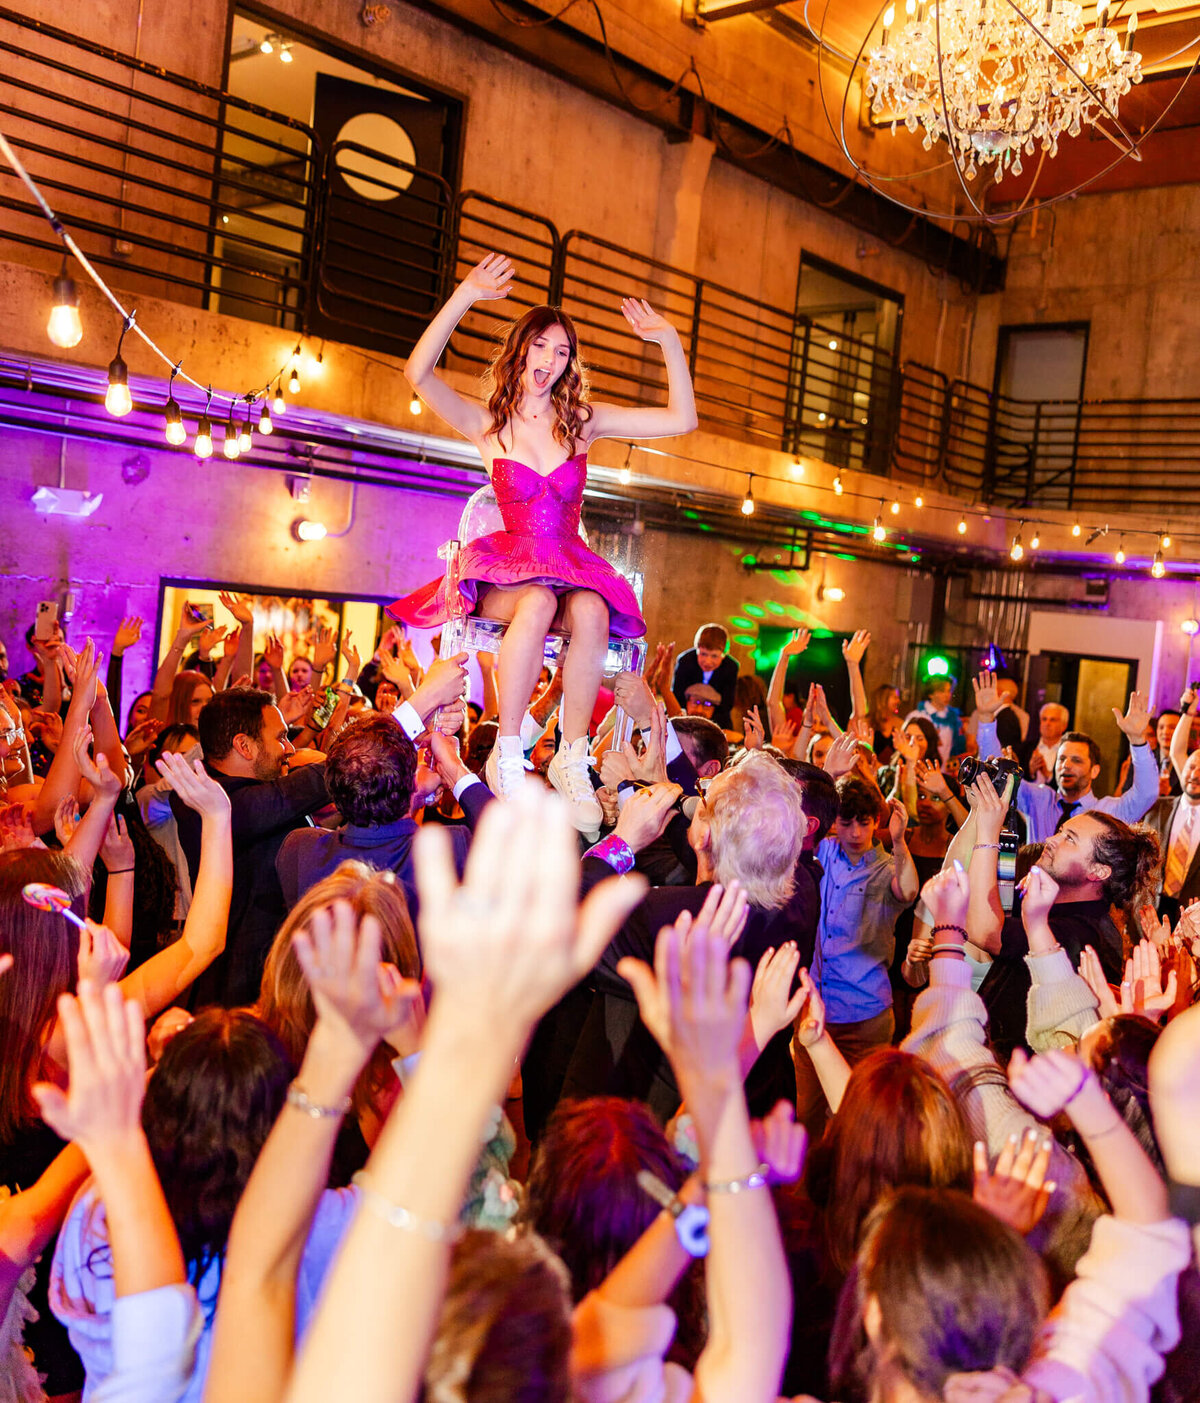 Bellevue Bar and Bat Mitzvah Photography of a teen girl in a pink dress sitting in a chair being lifted above a crowded dance floor